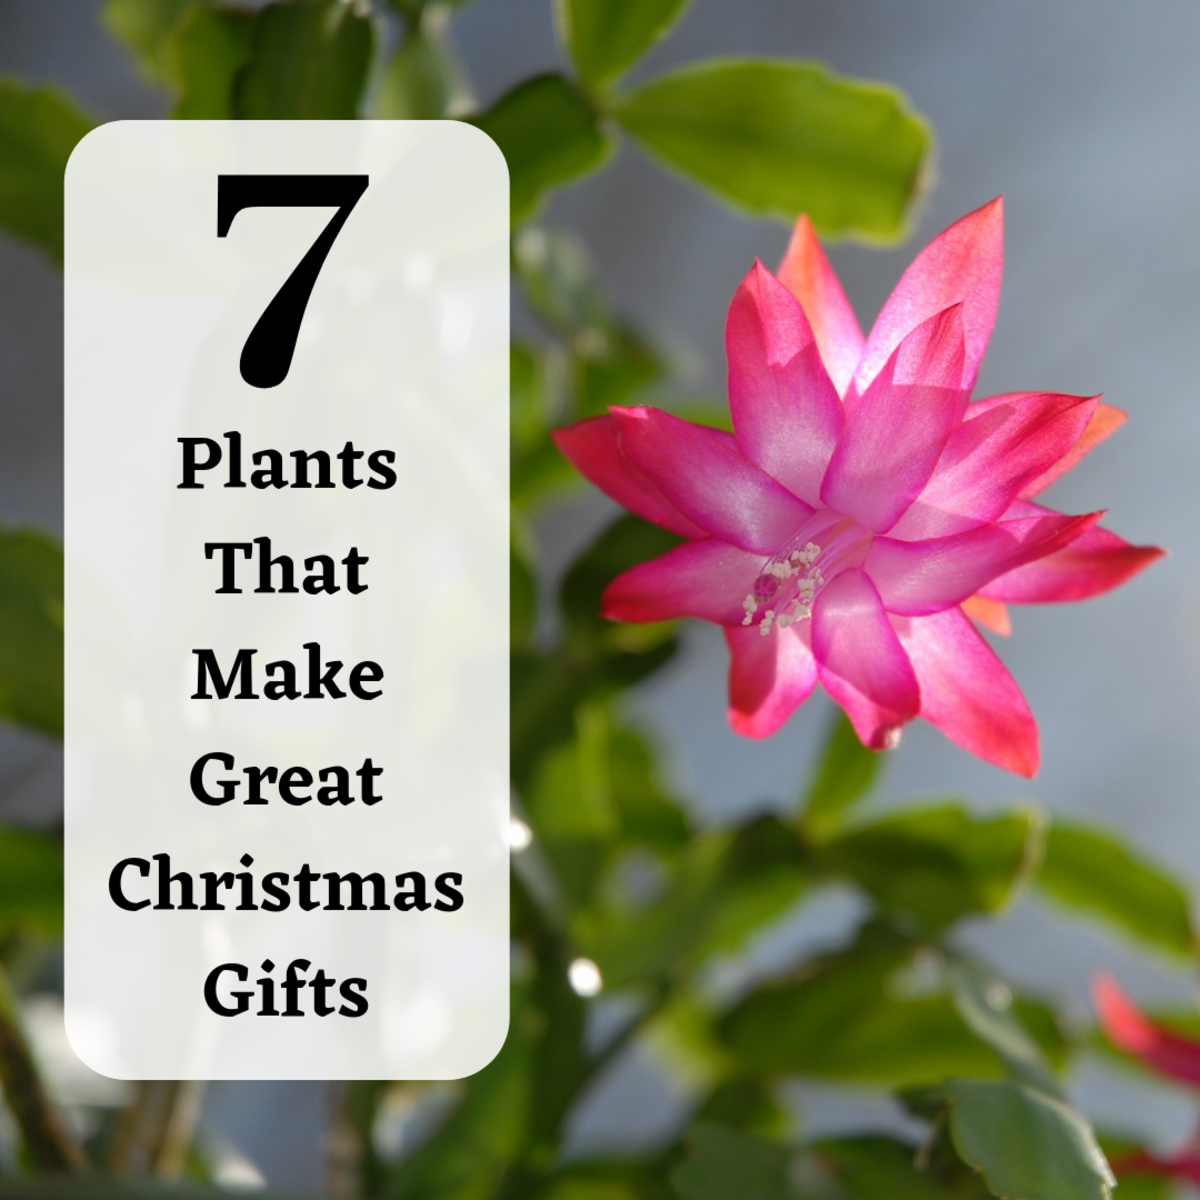 Living Christmas Gift Ideas: 7 Holiday Plants to Give